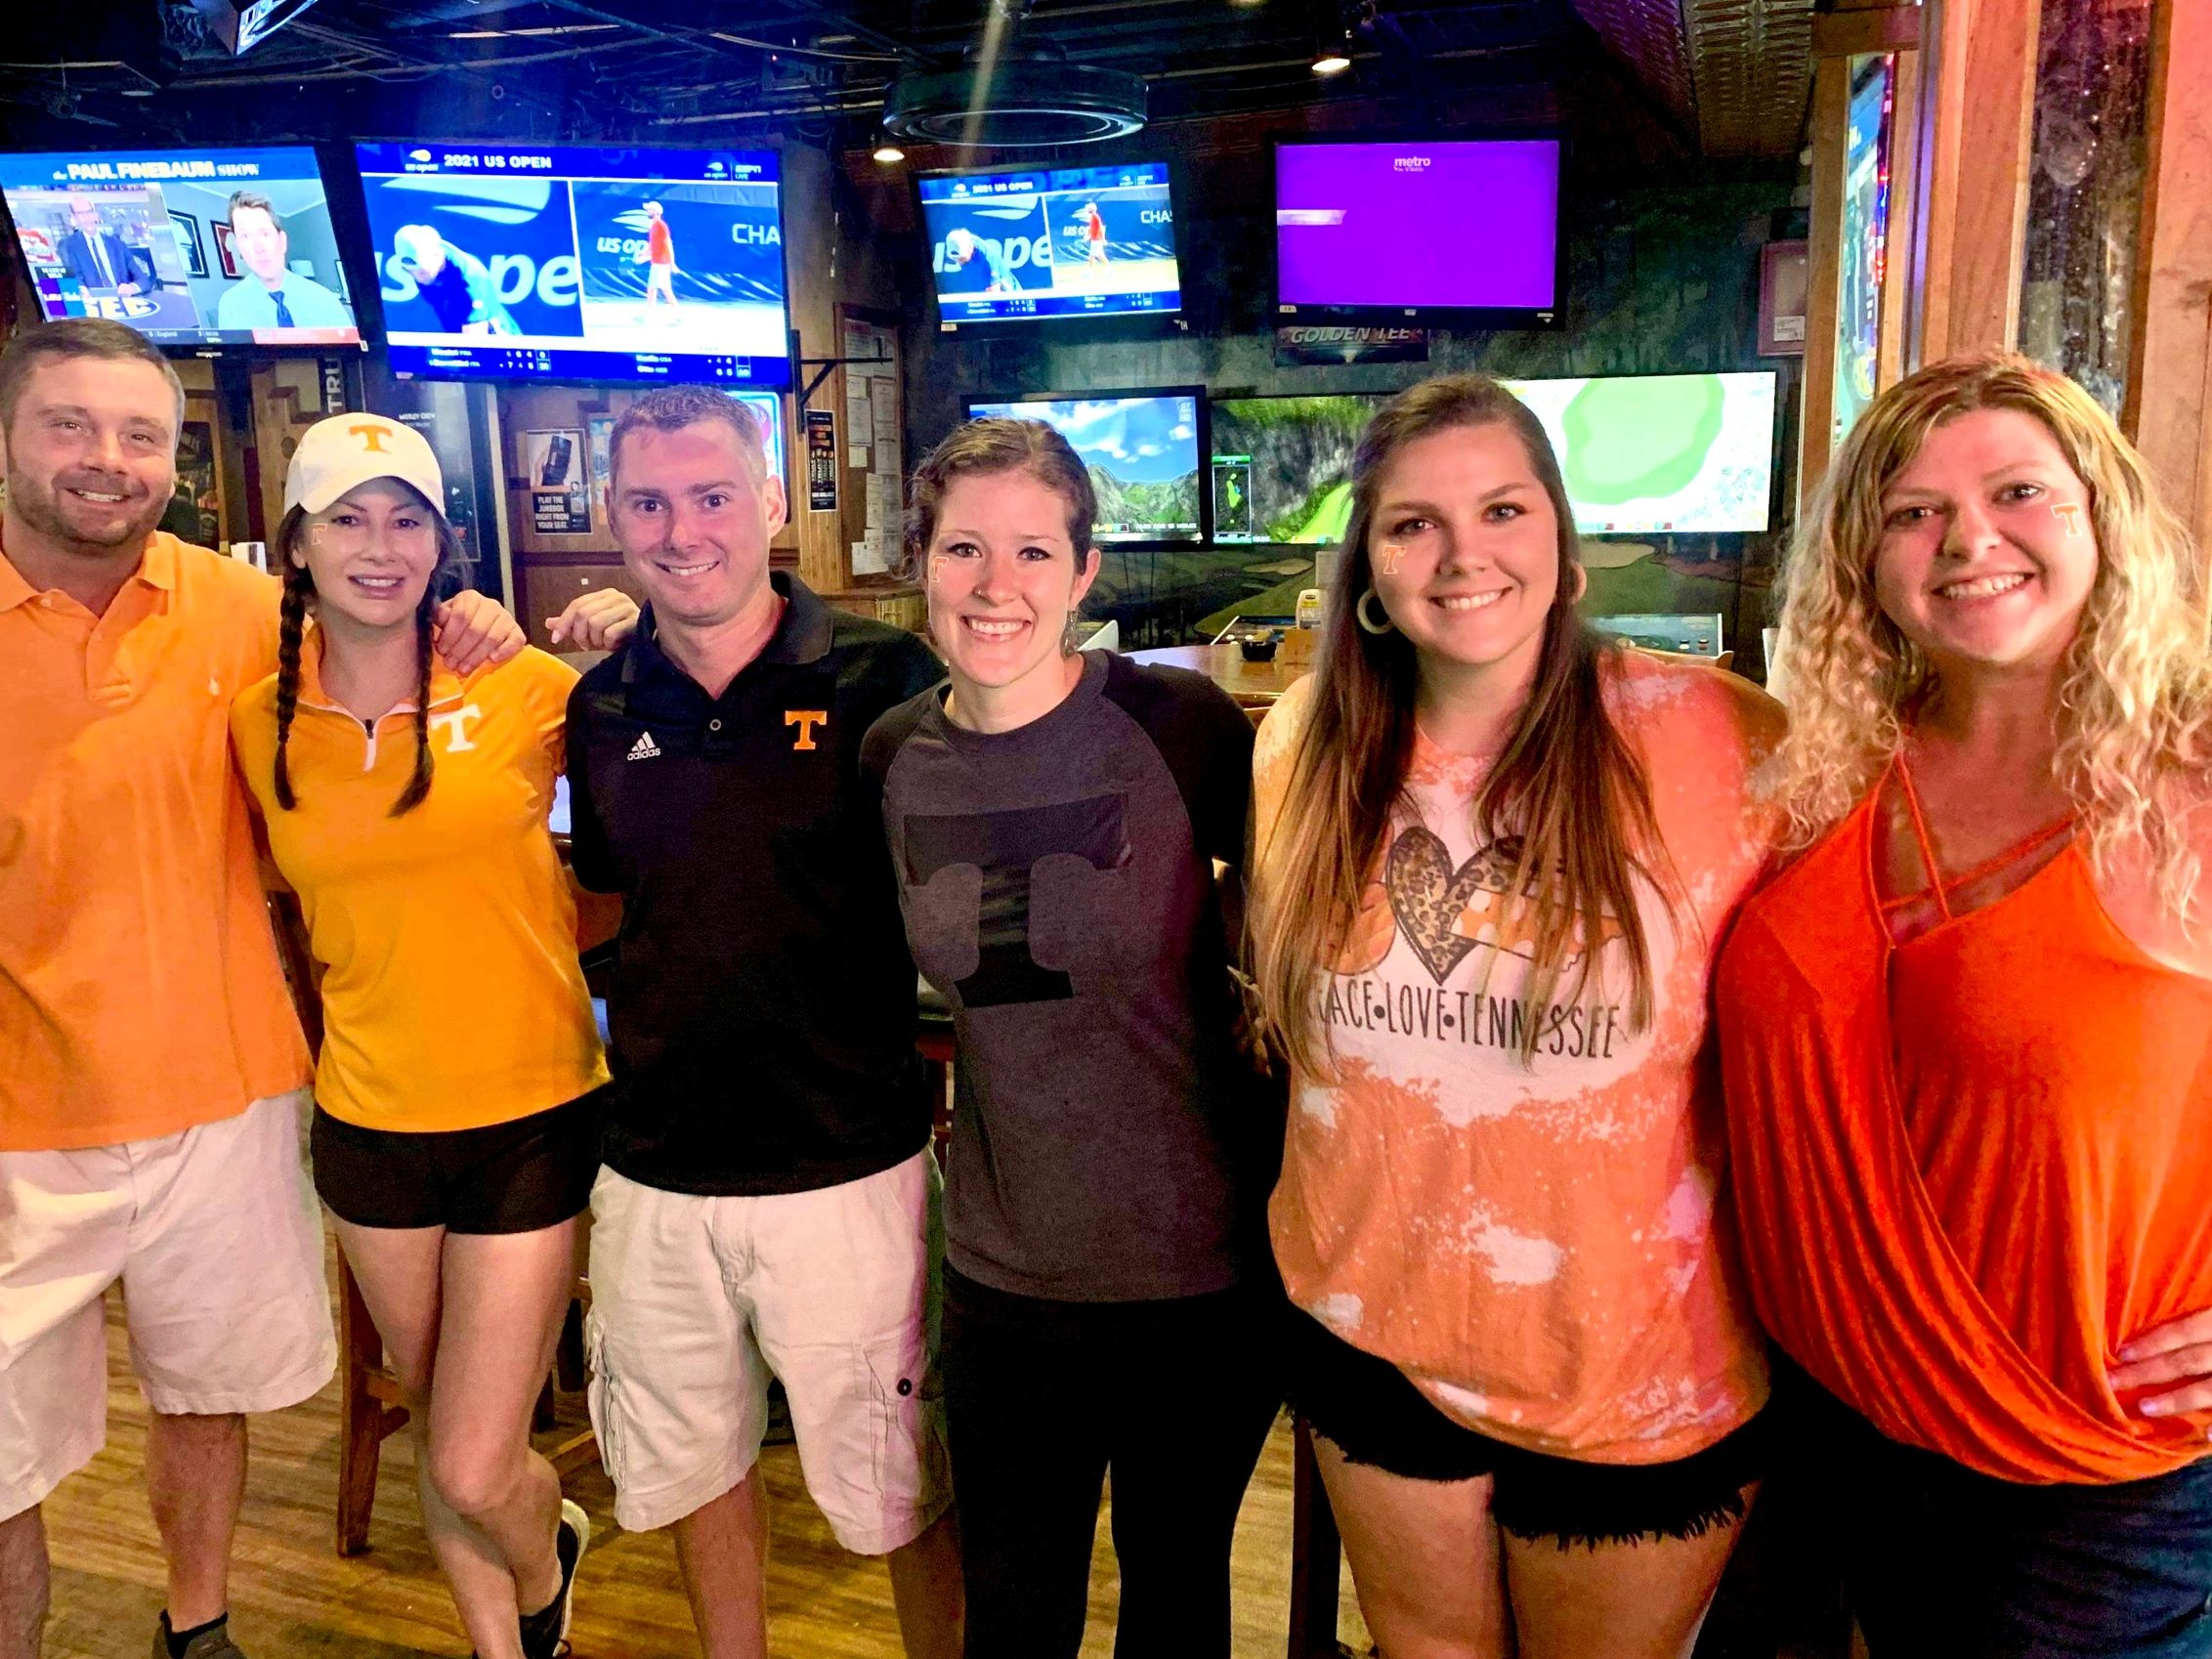 Six employees wearing Tennessee clothes smiling in the bar area at Rooster's Sports Bar